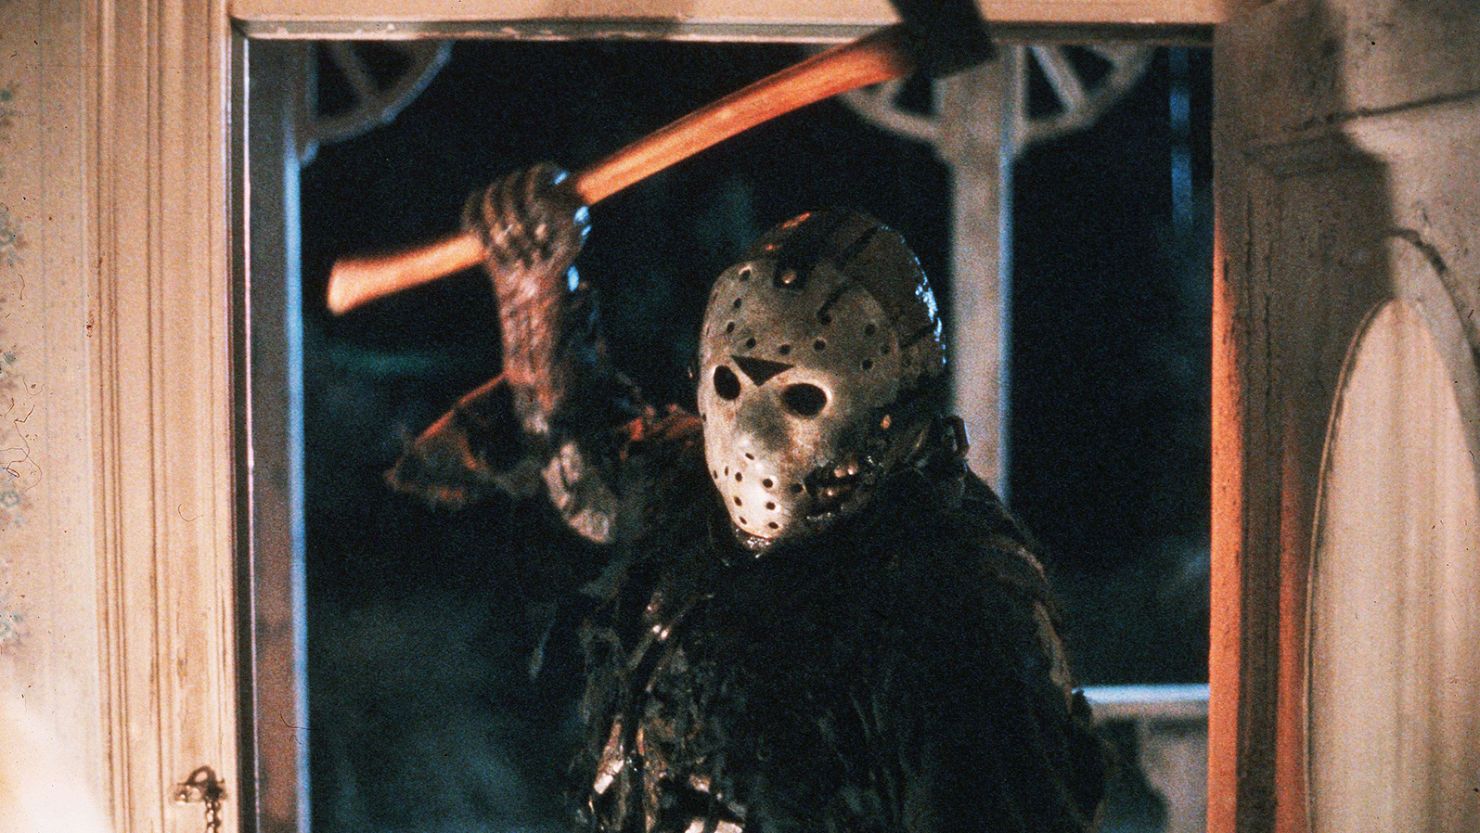 I Want To Play 'Friday The 13th' With a Drinking Game!